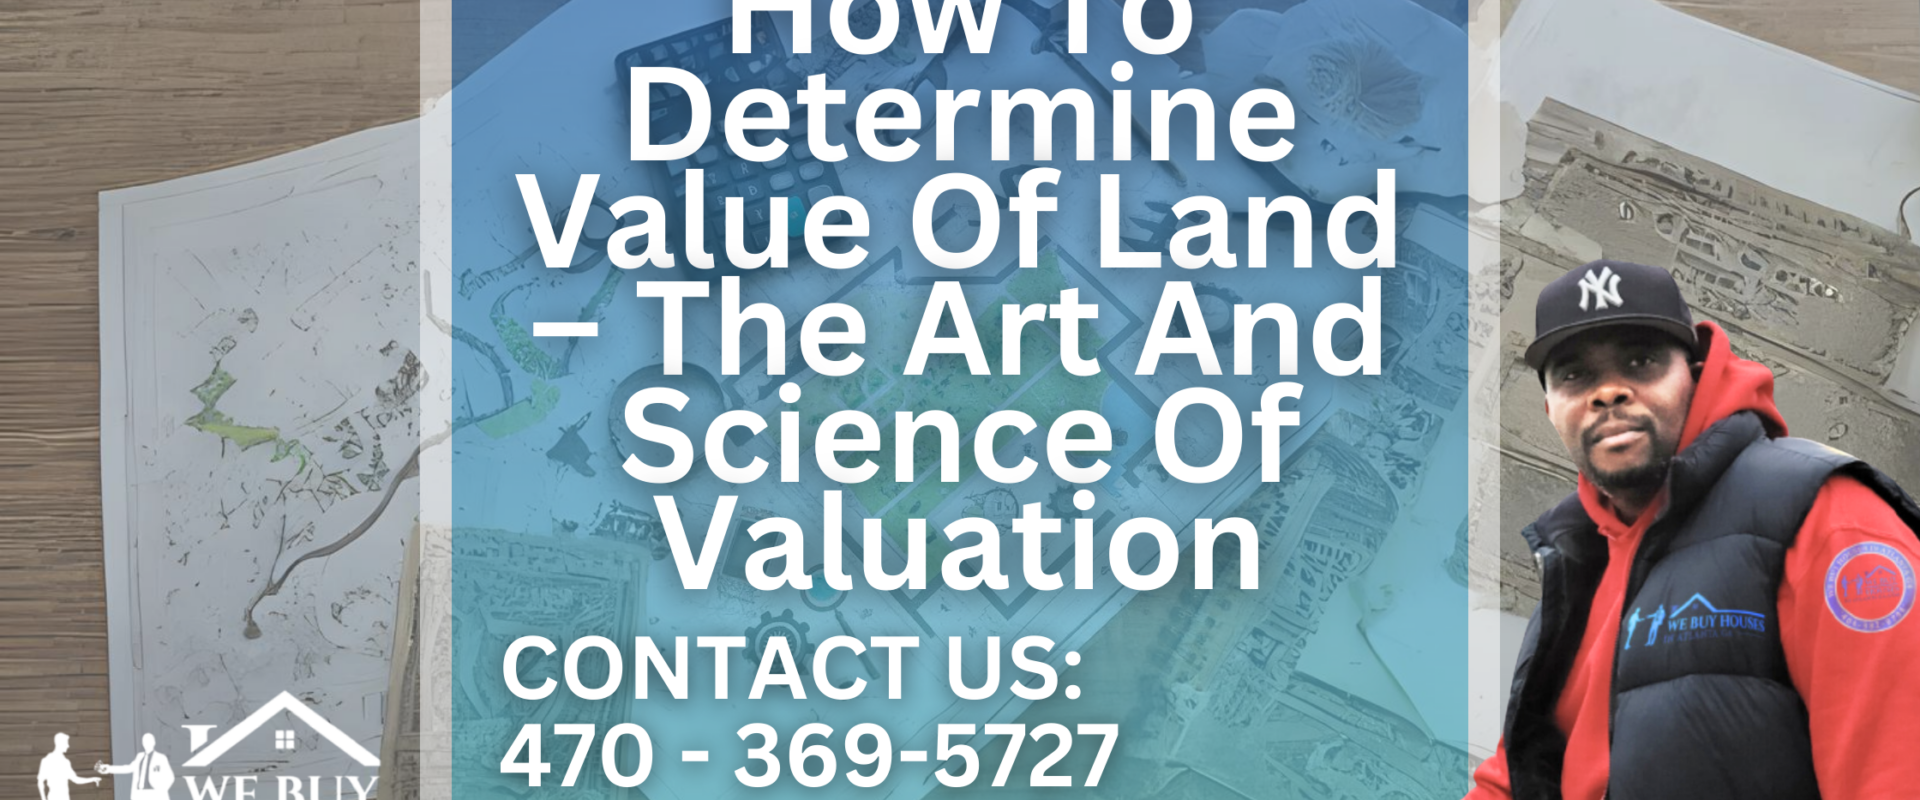 How To Determine Value Of Land – The Art And Science Of Valuation